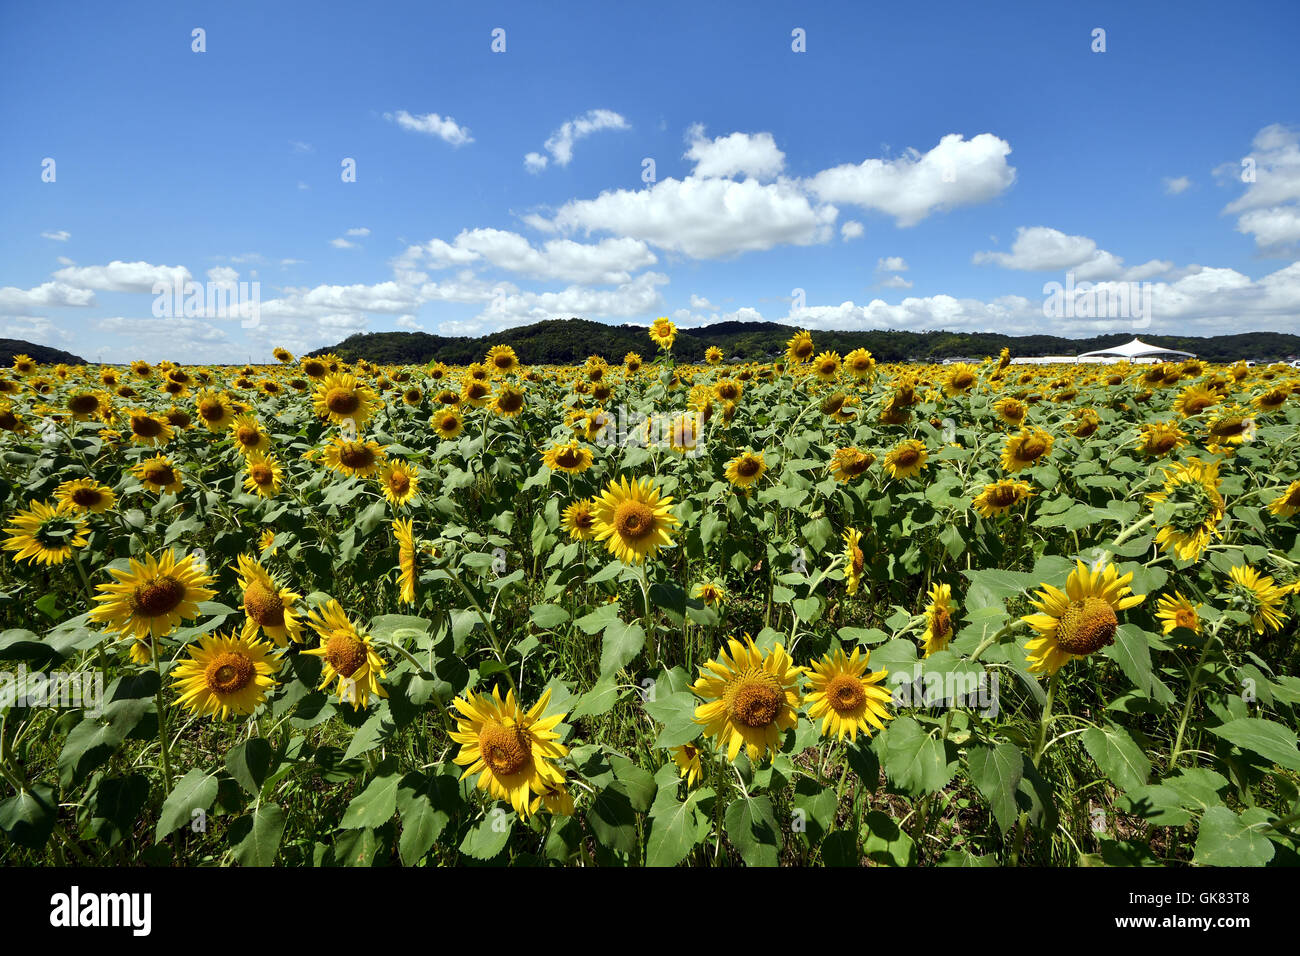 Mashiko, Japan. 19th Aug, 2016. Sunflowers shine brightly in the sweltering summer sun in Mashiko, a rural community known for Mashiko pottery, on Friday, August 19, 2016. Some two million sunflowers of 20 different kinds planted in a 30-acre fallow field are expected to draw hundreds of visitors to an annual sunflower festival starting from August 20 in the town about 57 miles northeast of Tokyo. Credit:  Natsuki Sakai/AFLO/Alamy Live News Stock Photo